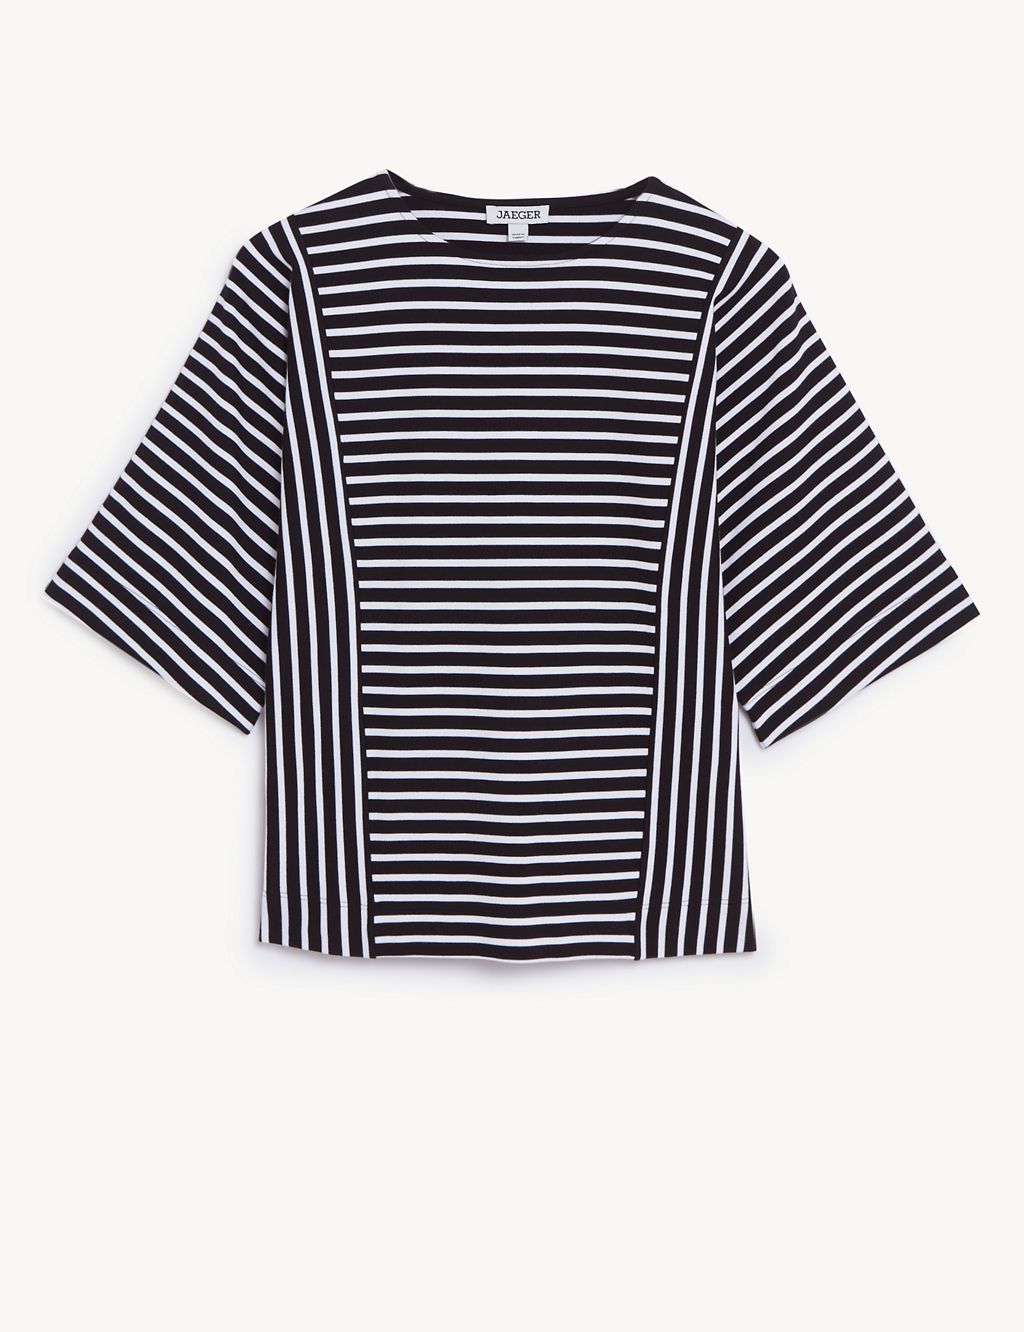 Striped Crew Neck Short Sleeve Top 1 of 6